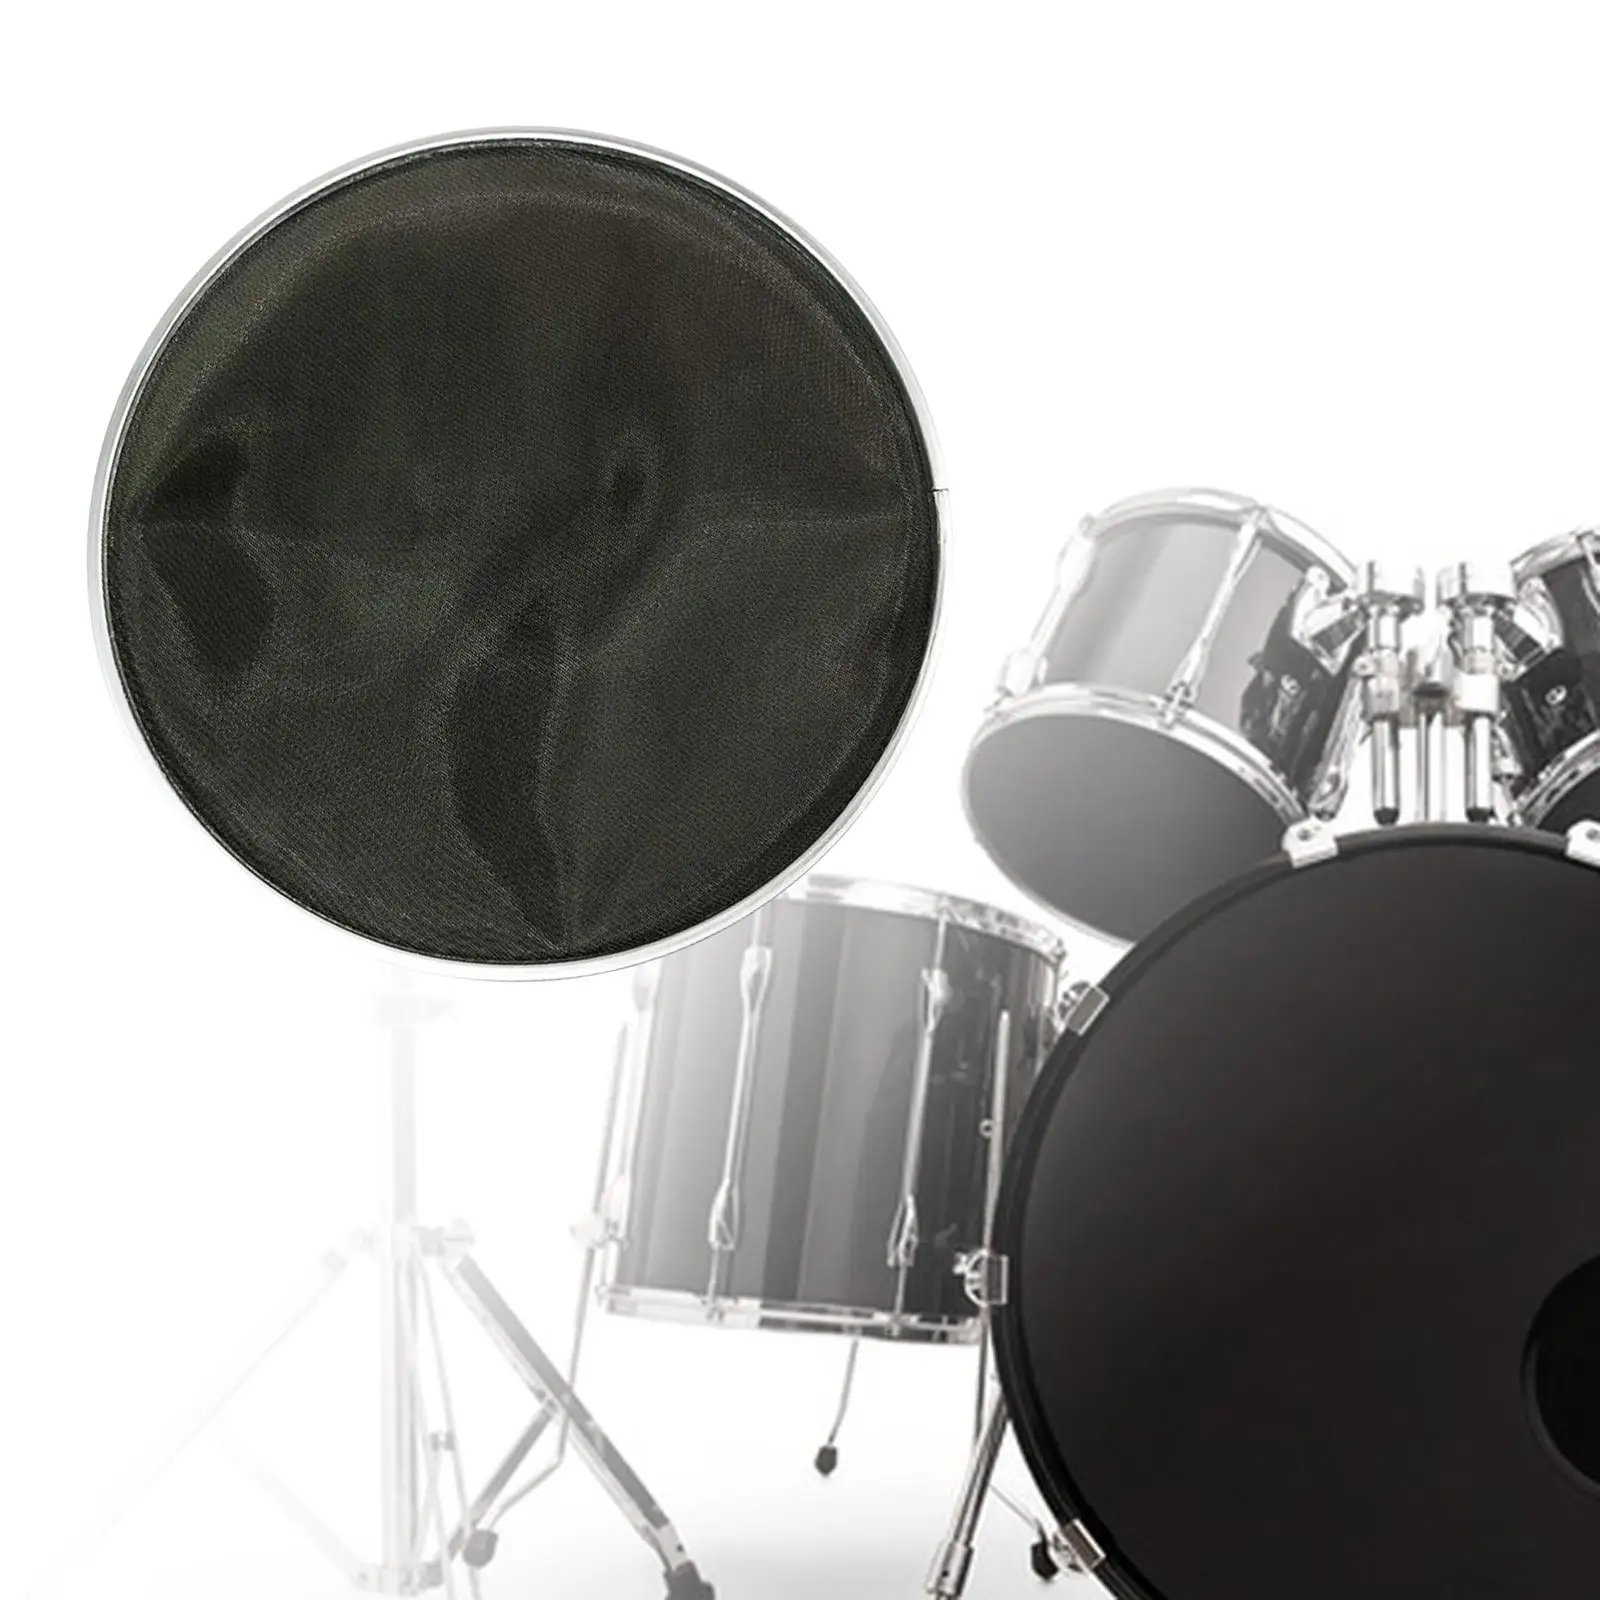 Bass Drum Drumhead Externally Mounted Percussion Parts Reusable for Drum Kit Jazz Drum